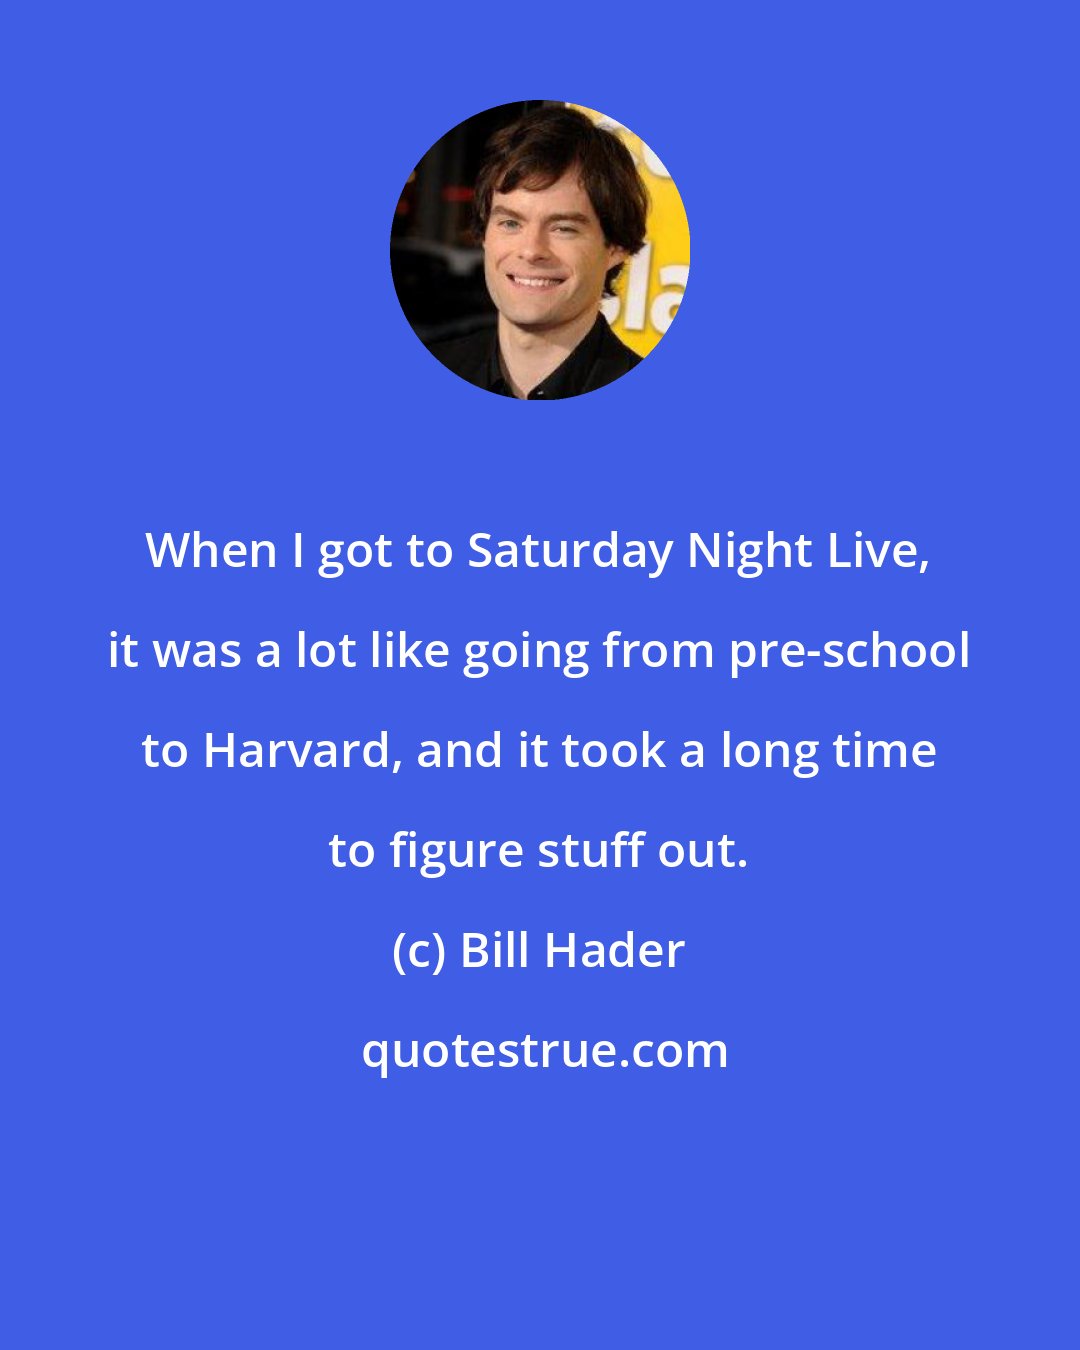 Bill Hader: When I got to Saturday Night Live, it was a lot like going from pre-school to Harvard, and it took a long time to figure stuff out.